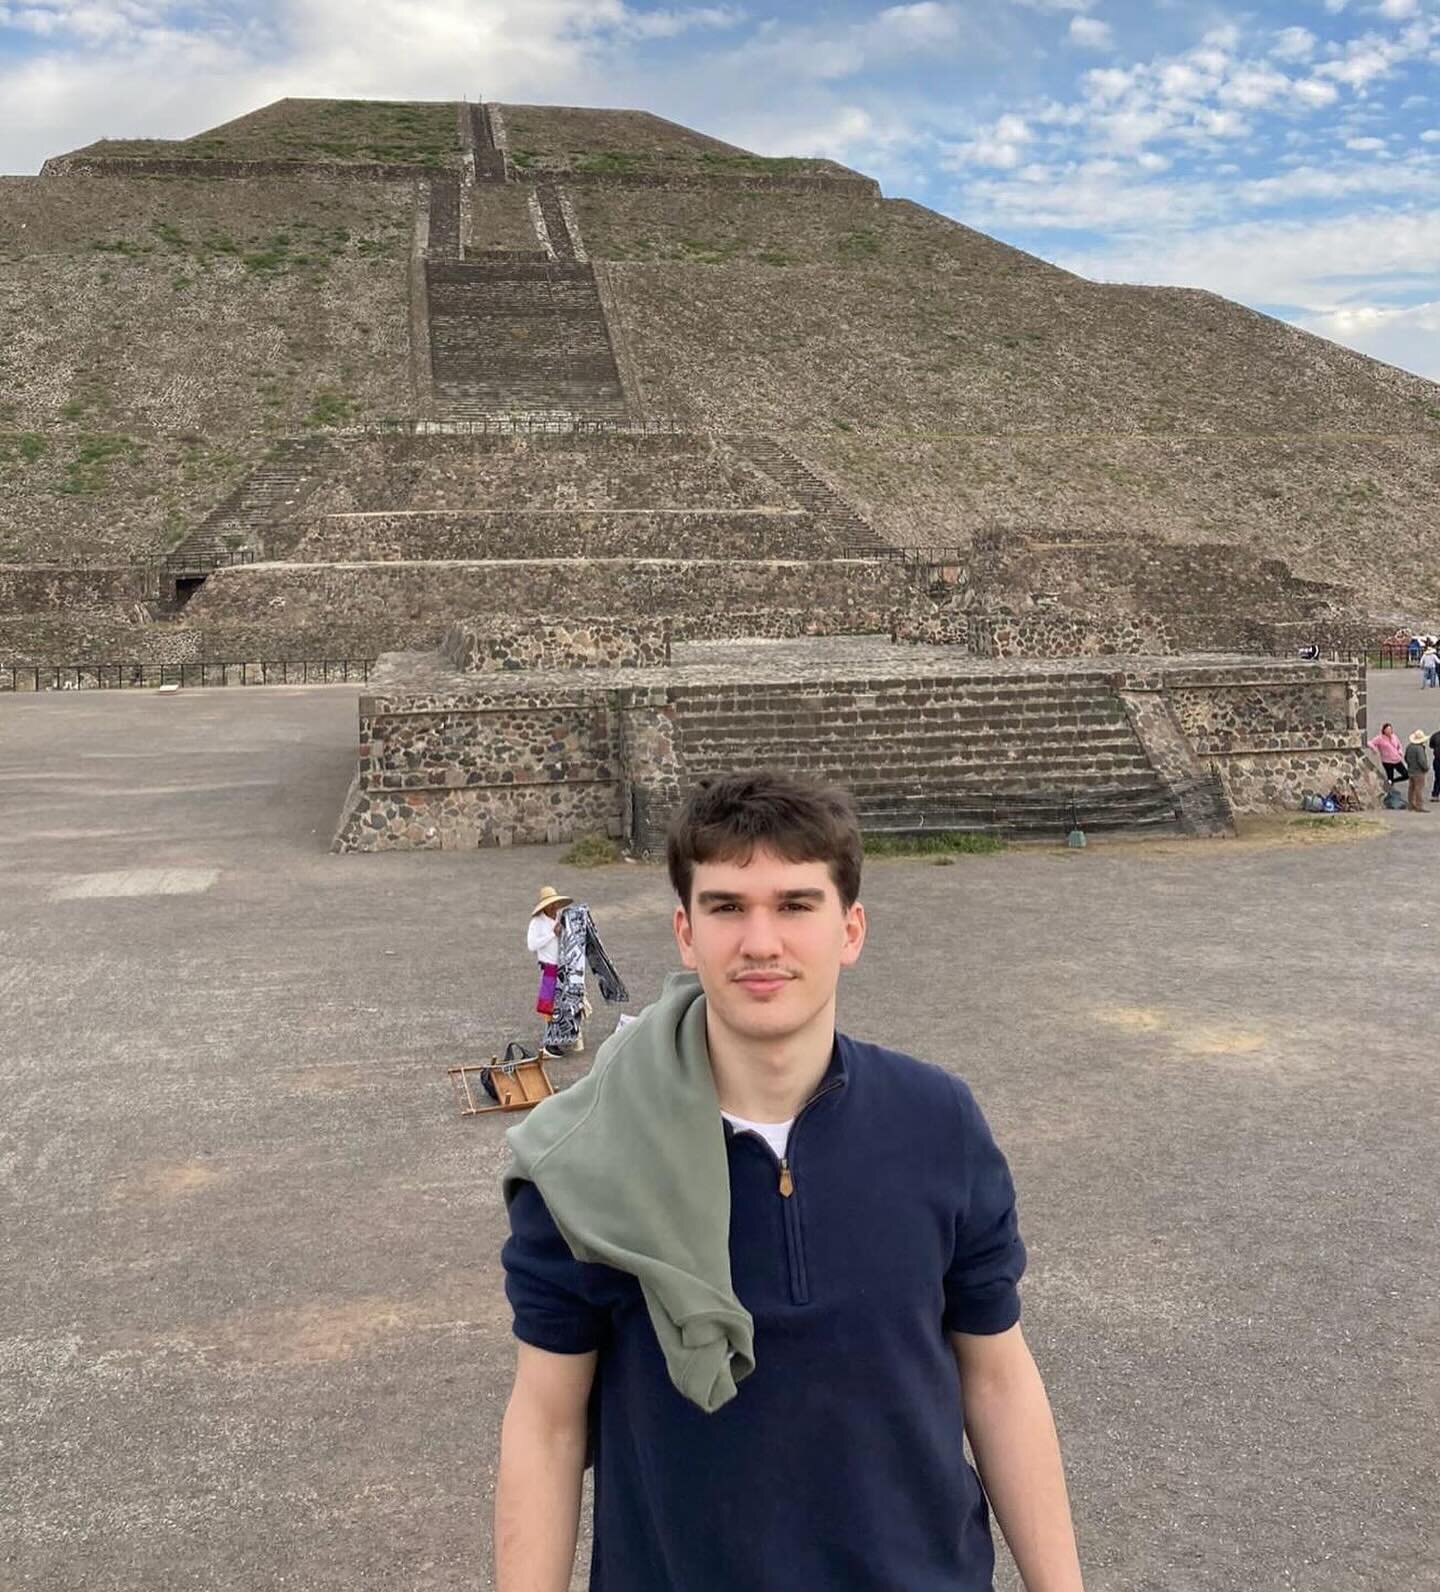 🌎MISS MONDAY🌎

Meet Evan from the class of Xalapa!

Hi! My name is Evan Jose. I was born and lived most of my life in Wiesbaden, Germany, after which I moved to Shanghai, China. I&rsquo;m a freshman studying Econ and Math. In my free time I like pl